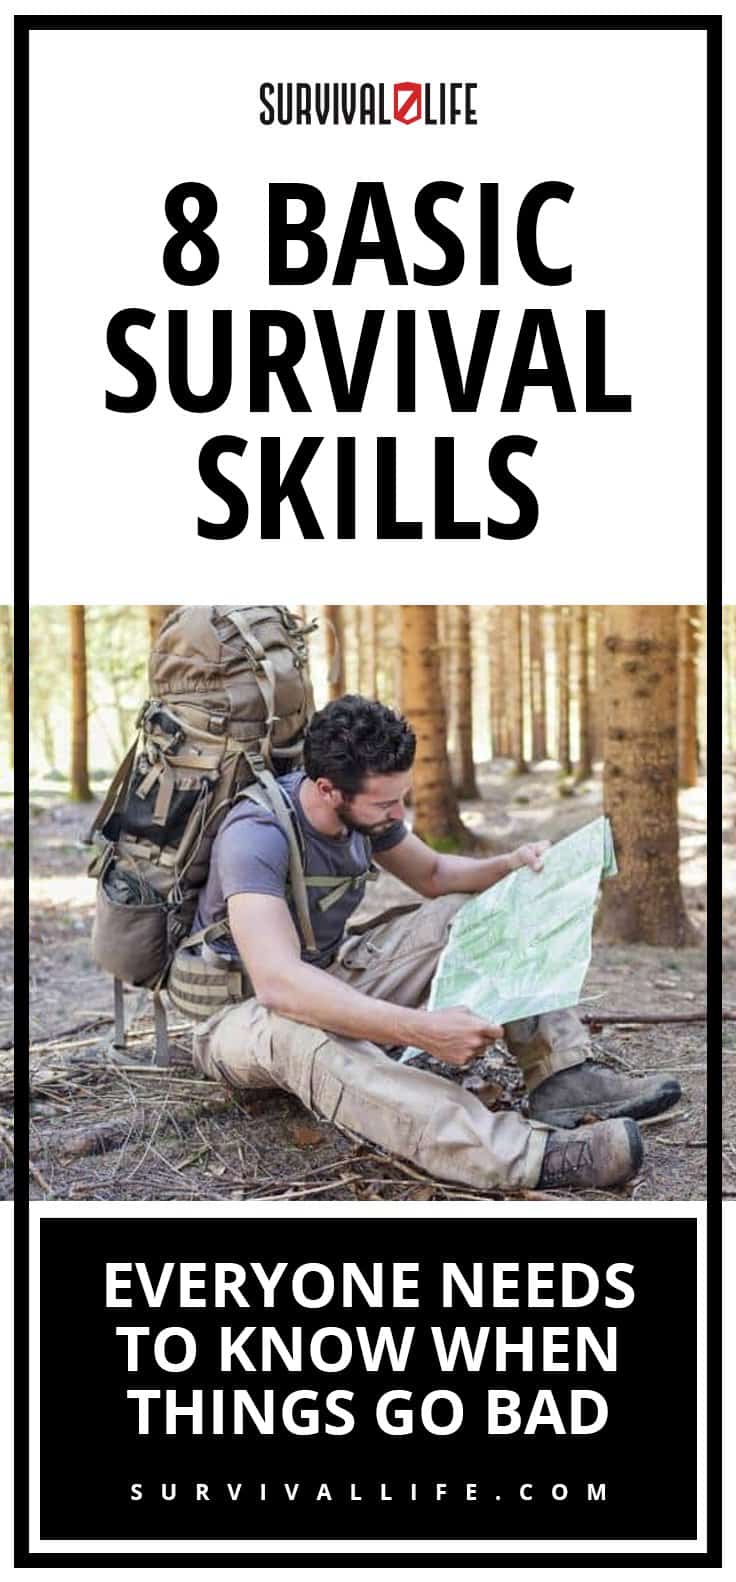 Survival Skills | 8 Basic Survival Skills Everyone Needs to Know When Things Go Bad